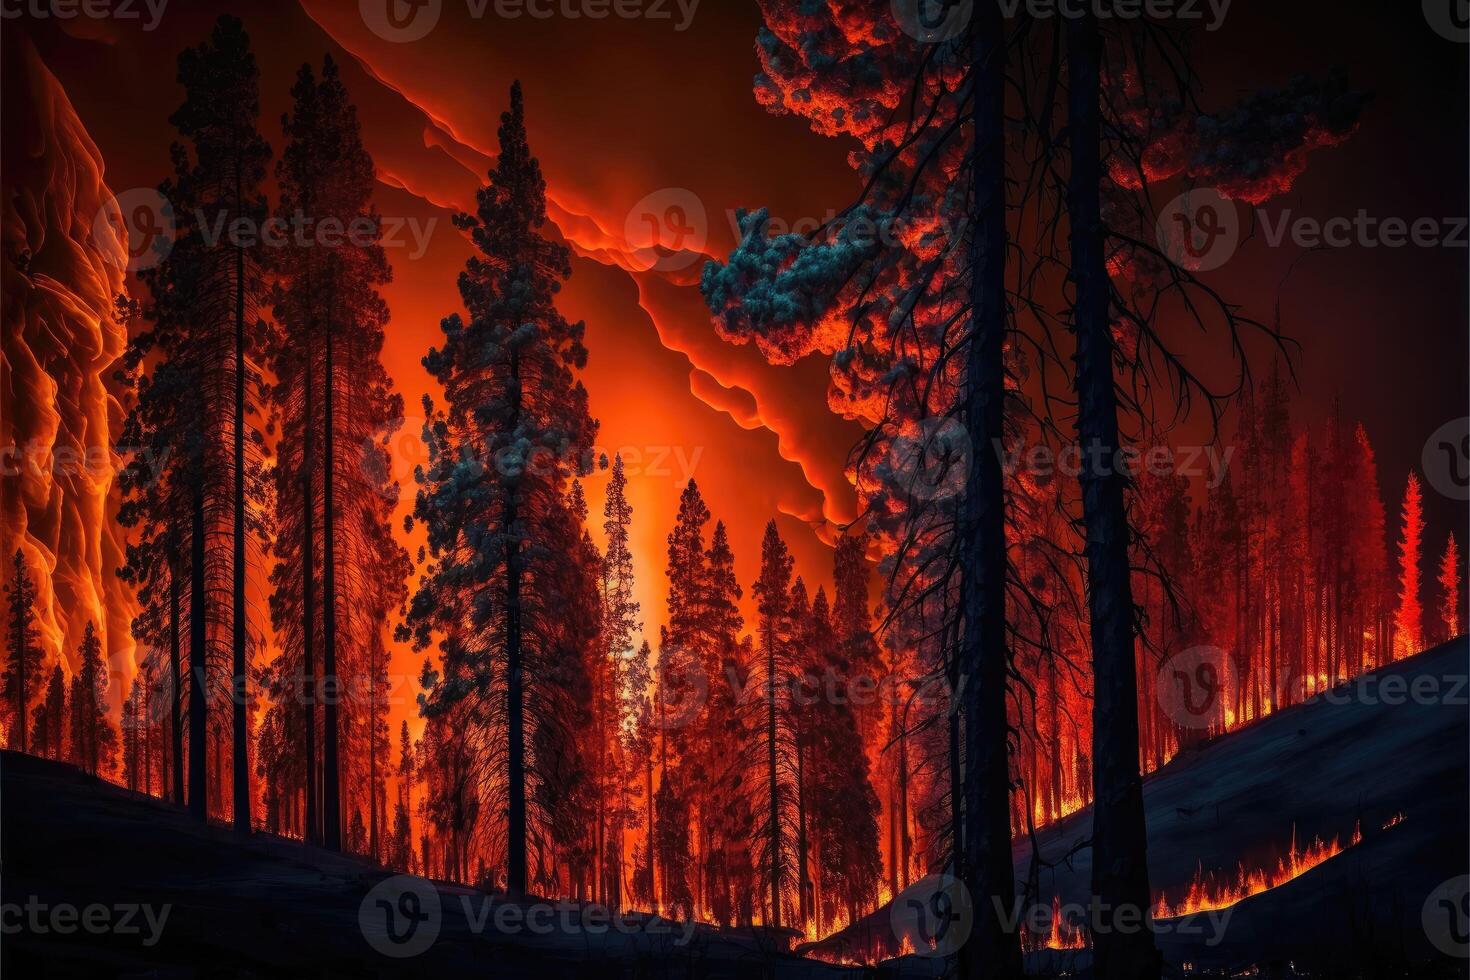 Wildfire and Burning. photo